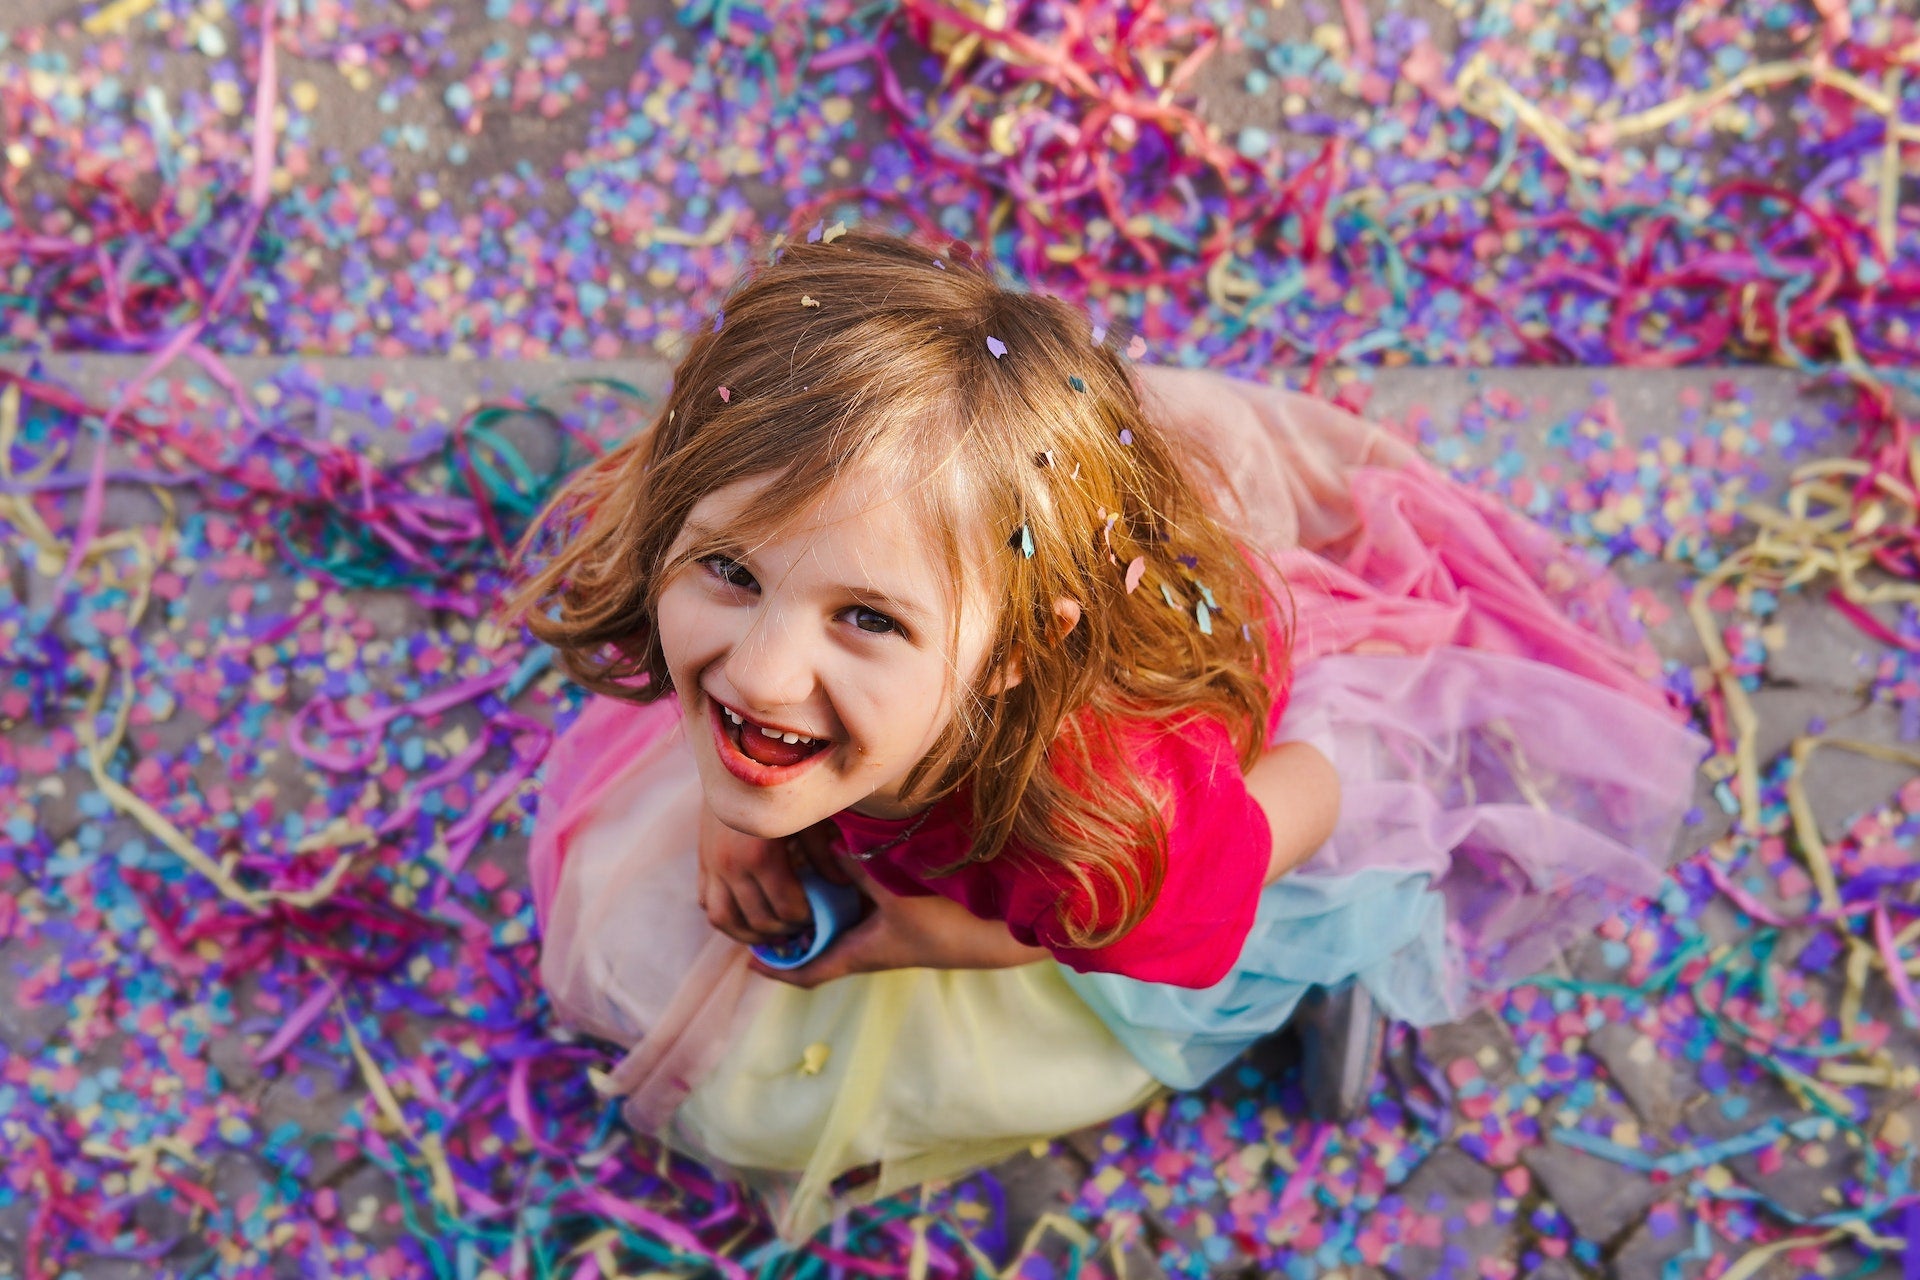 Ideas for Your Child’s Next Birthday Party